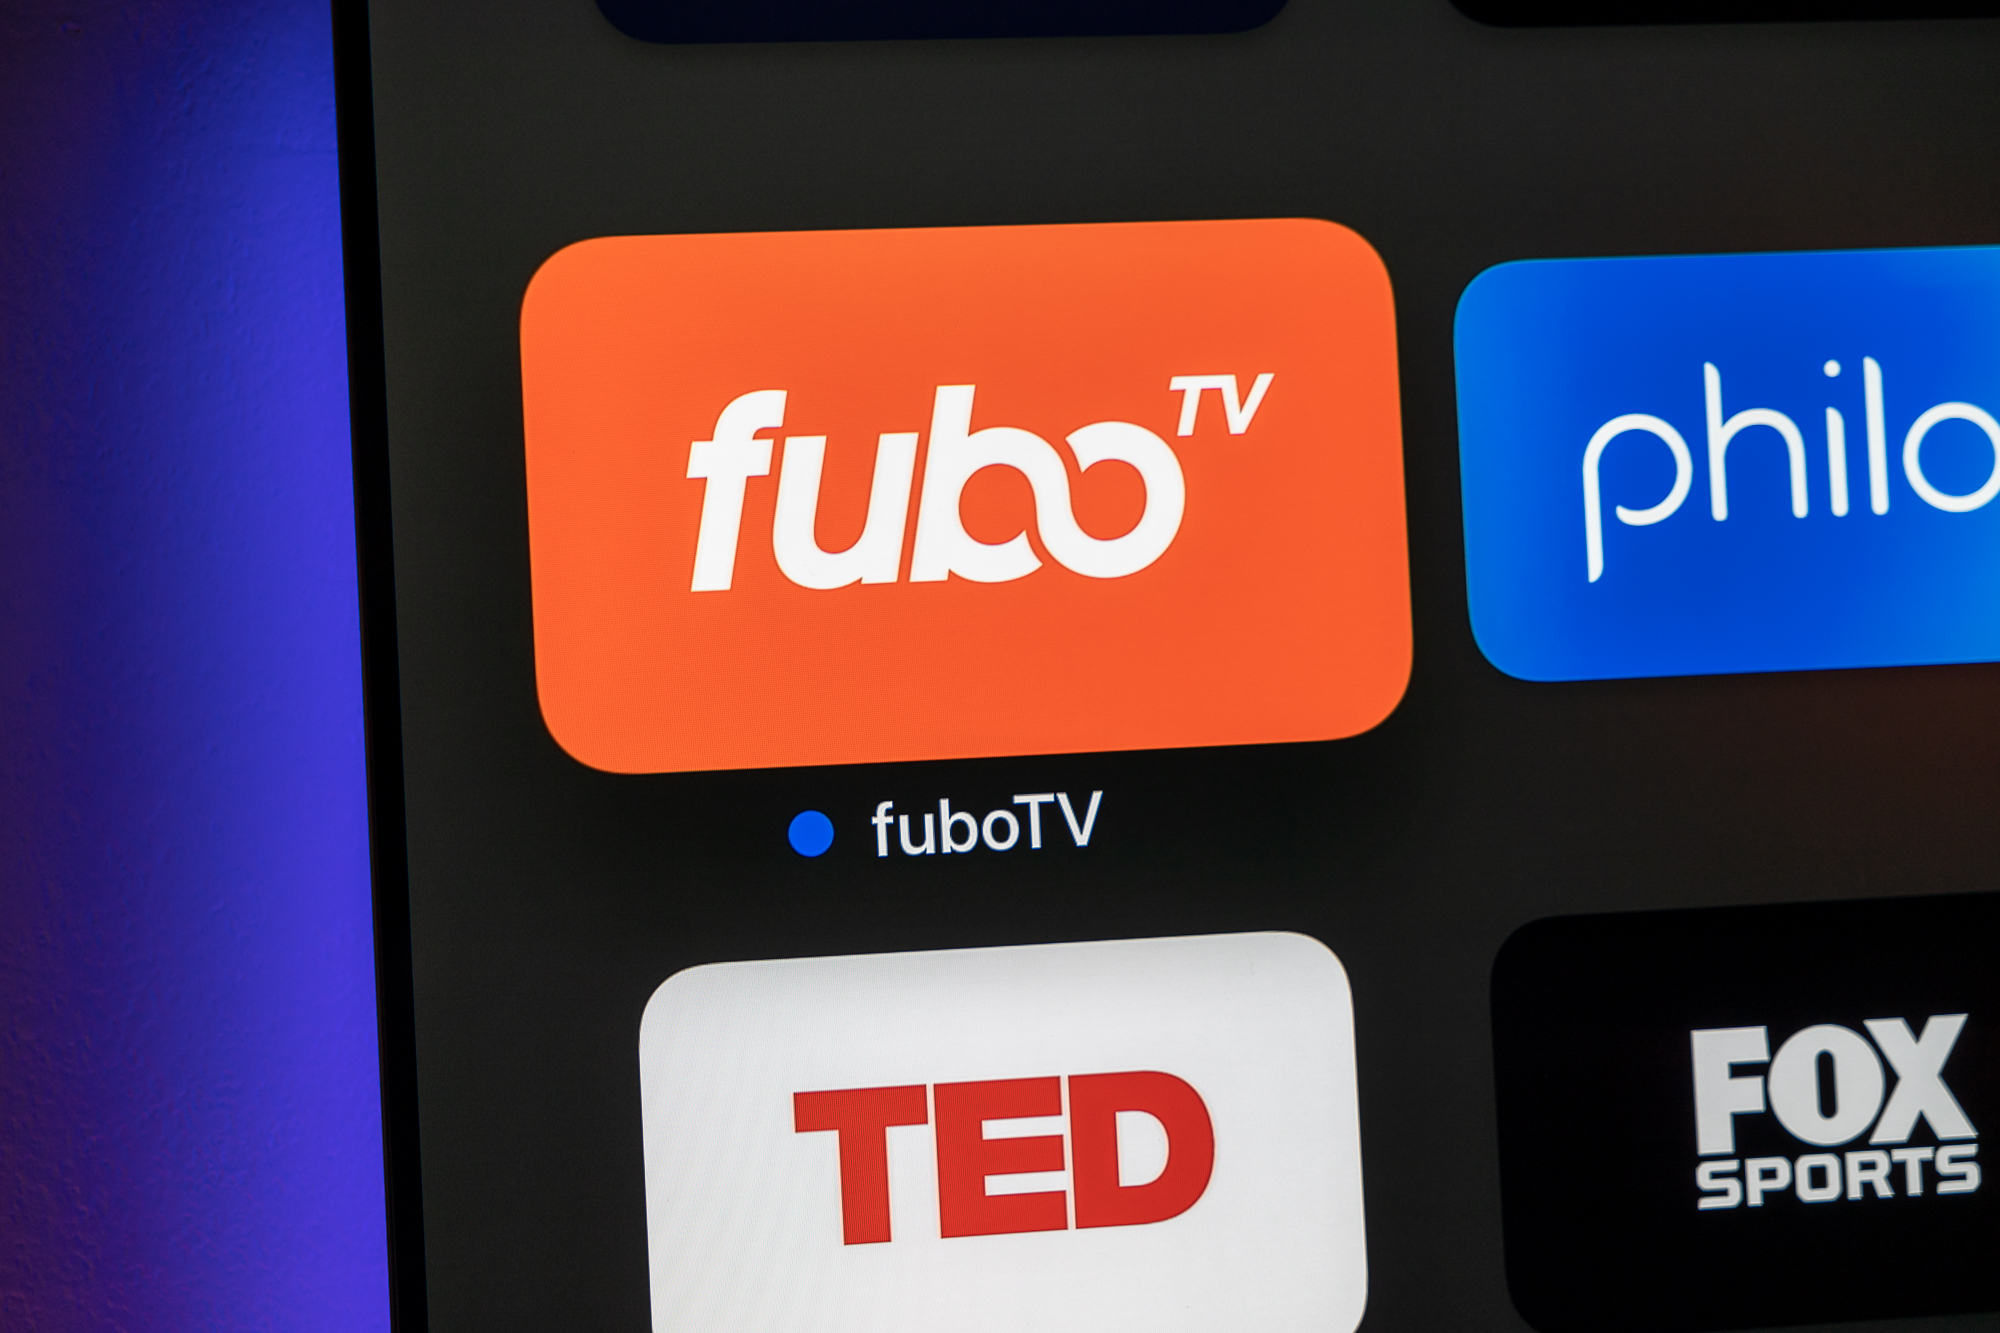 MLB will be available on Fubo this season Digital Trends